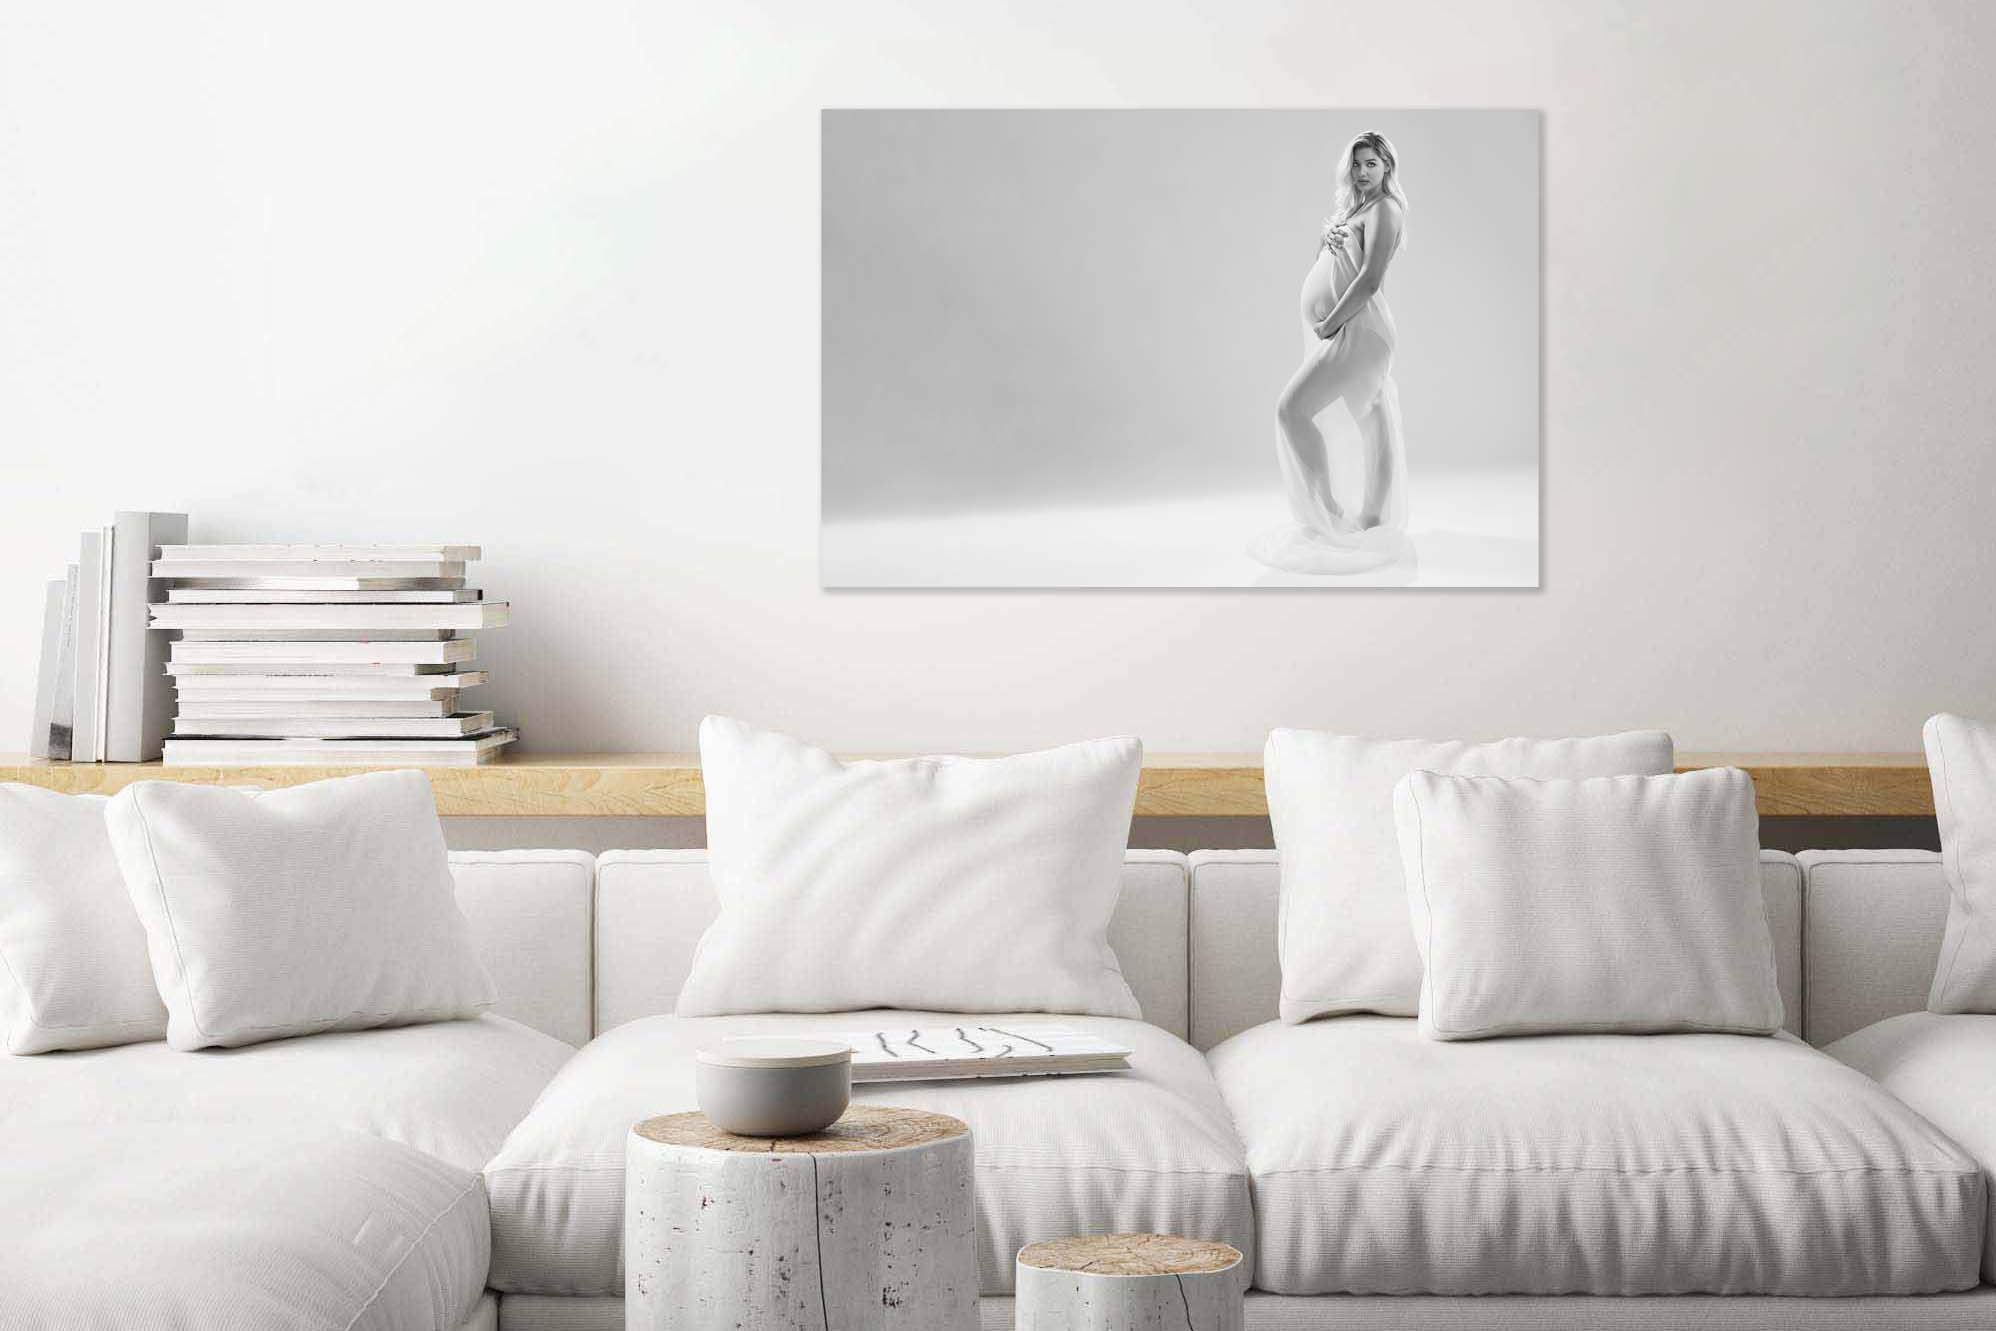 Maternity photo hanging in a home.